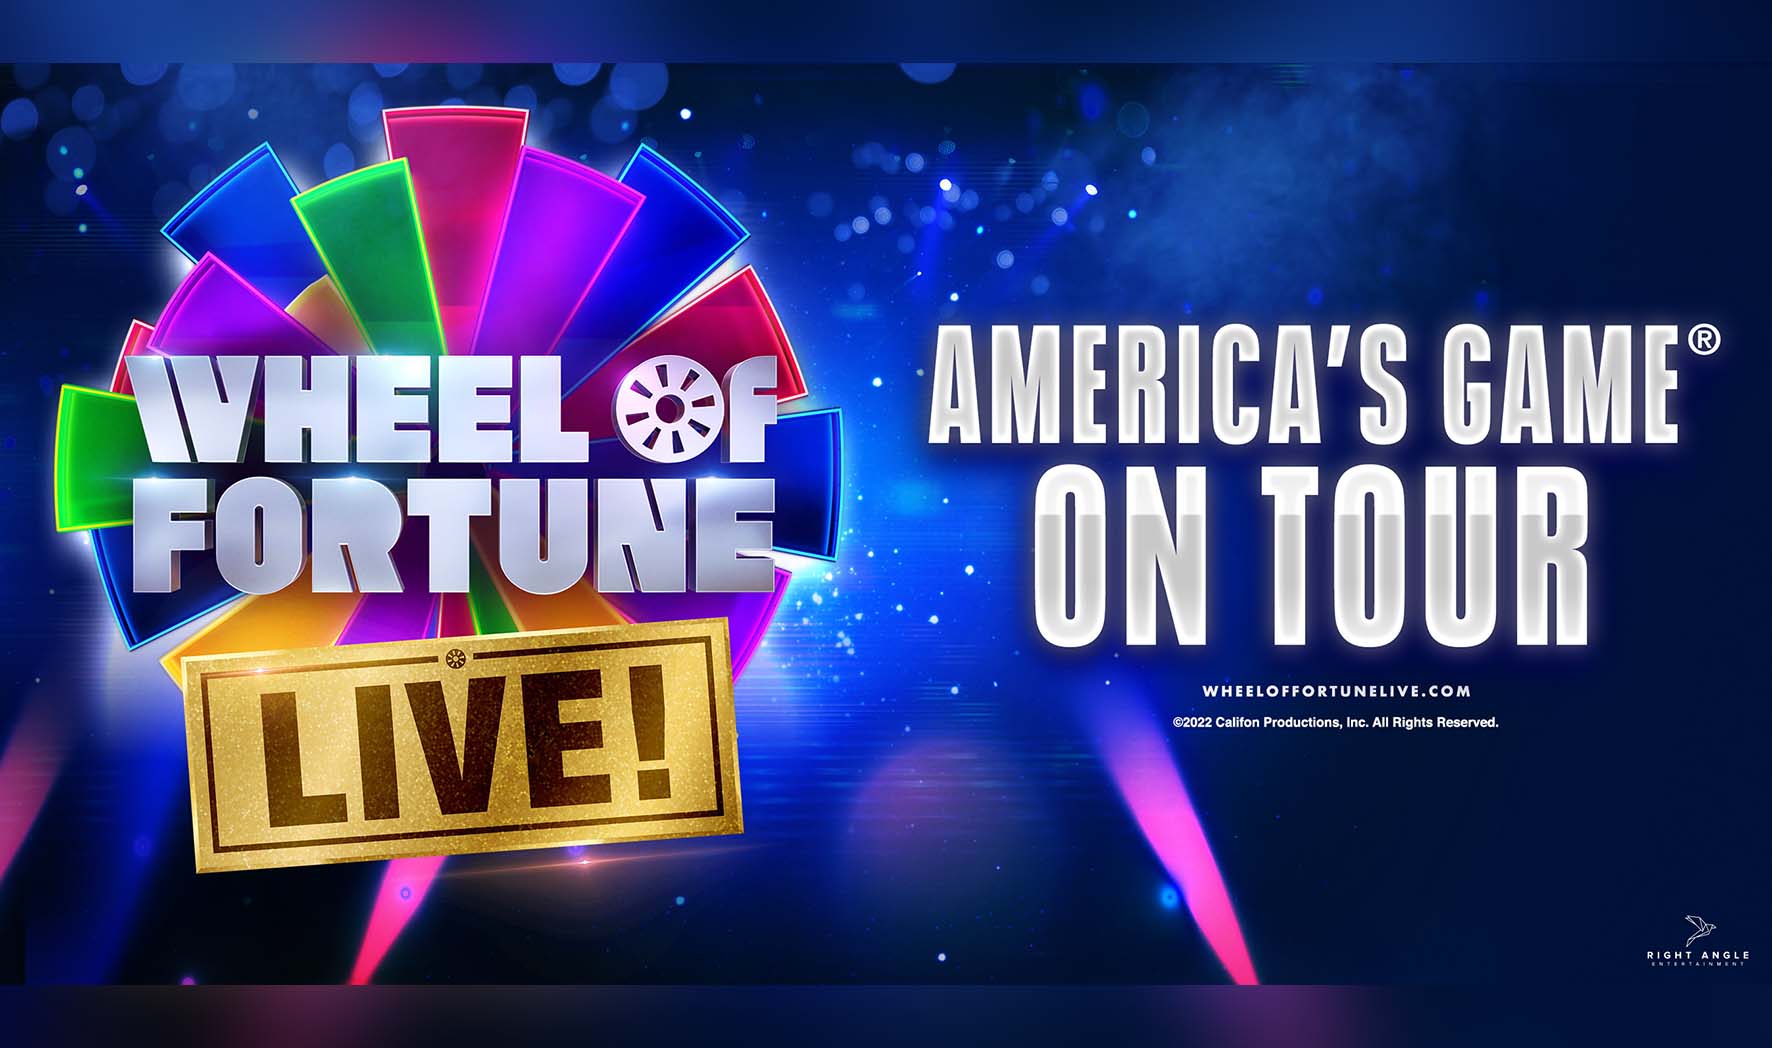 More Info for Wheel of Fortune Live!